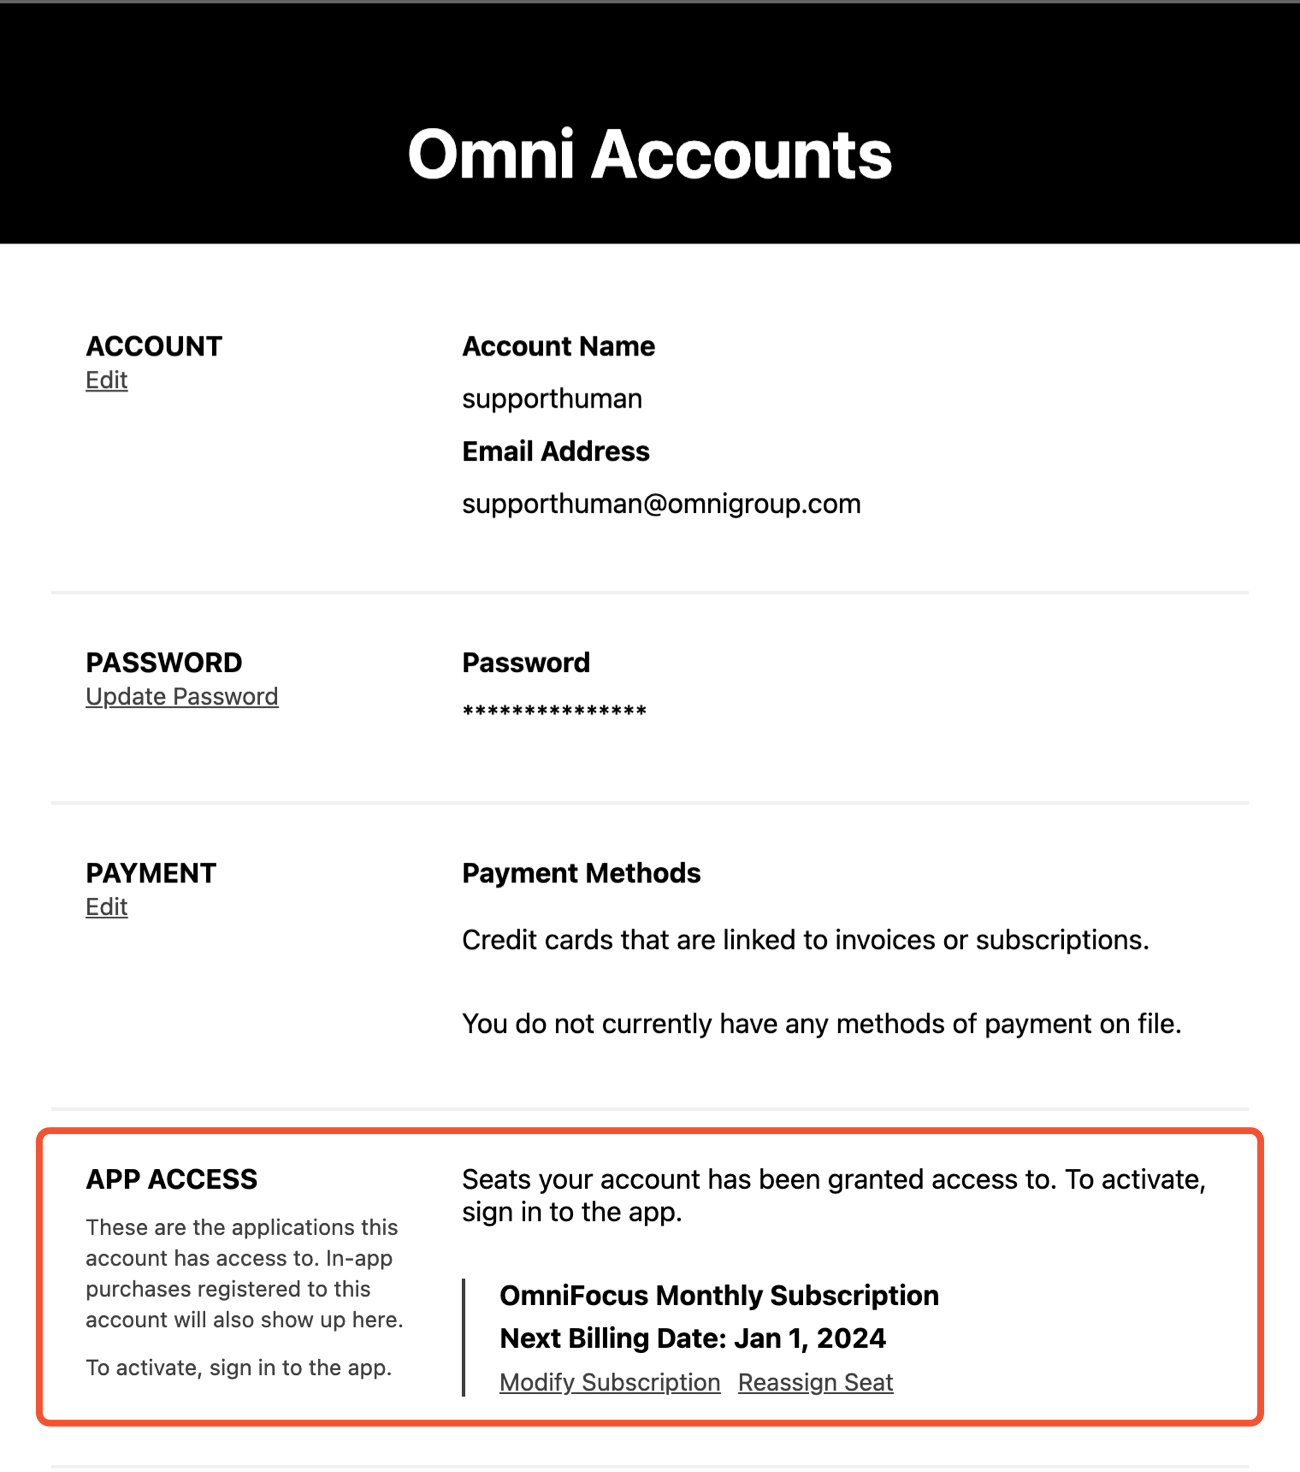 Details of your Omni Account status when logged in.